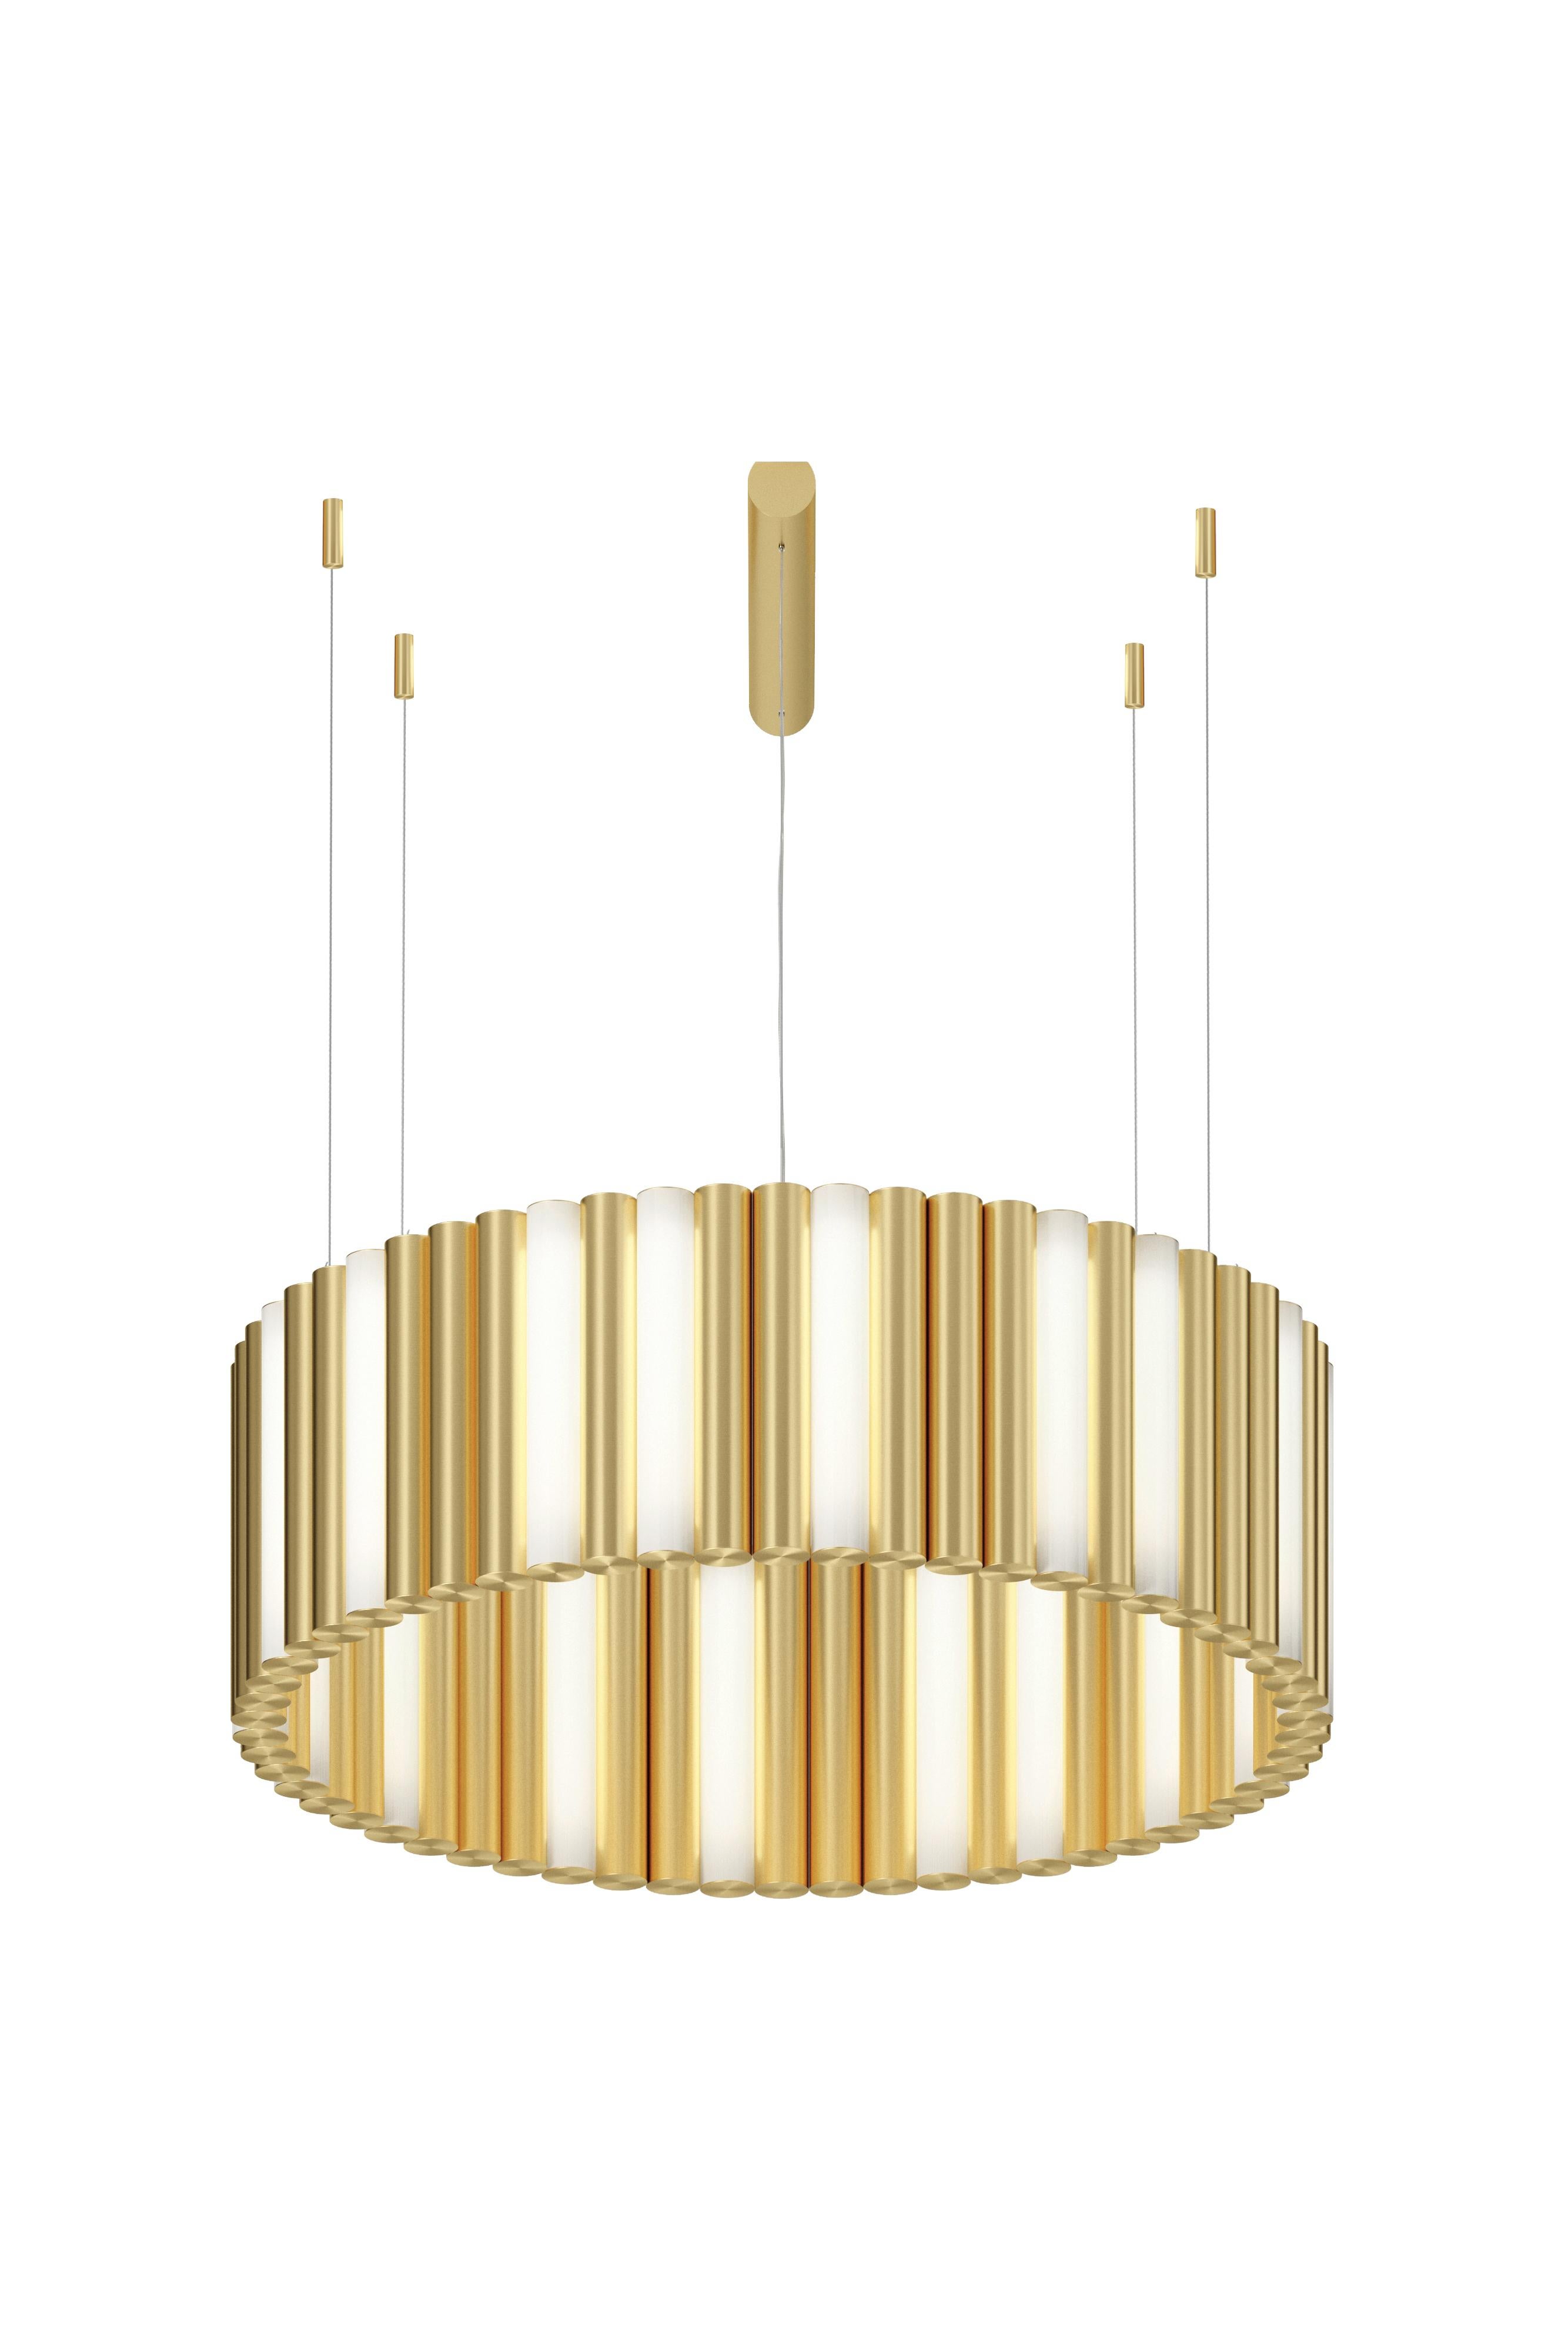 Gamma R58 brass pendant by Sylvain Willenz
Dimensions: D 98 x H 36.3 cm
Materials: solid brass, white polycarbonate diffuser, metal cable and transparent electric cable.
Others finishes and dimensions are available.

All our lamps can be wired